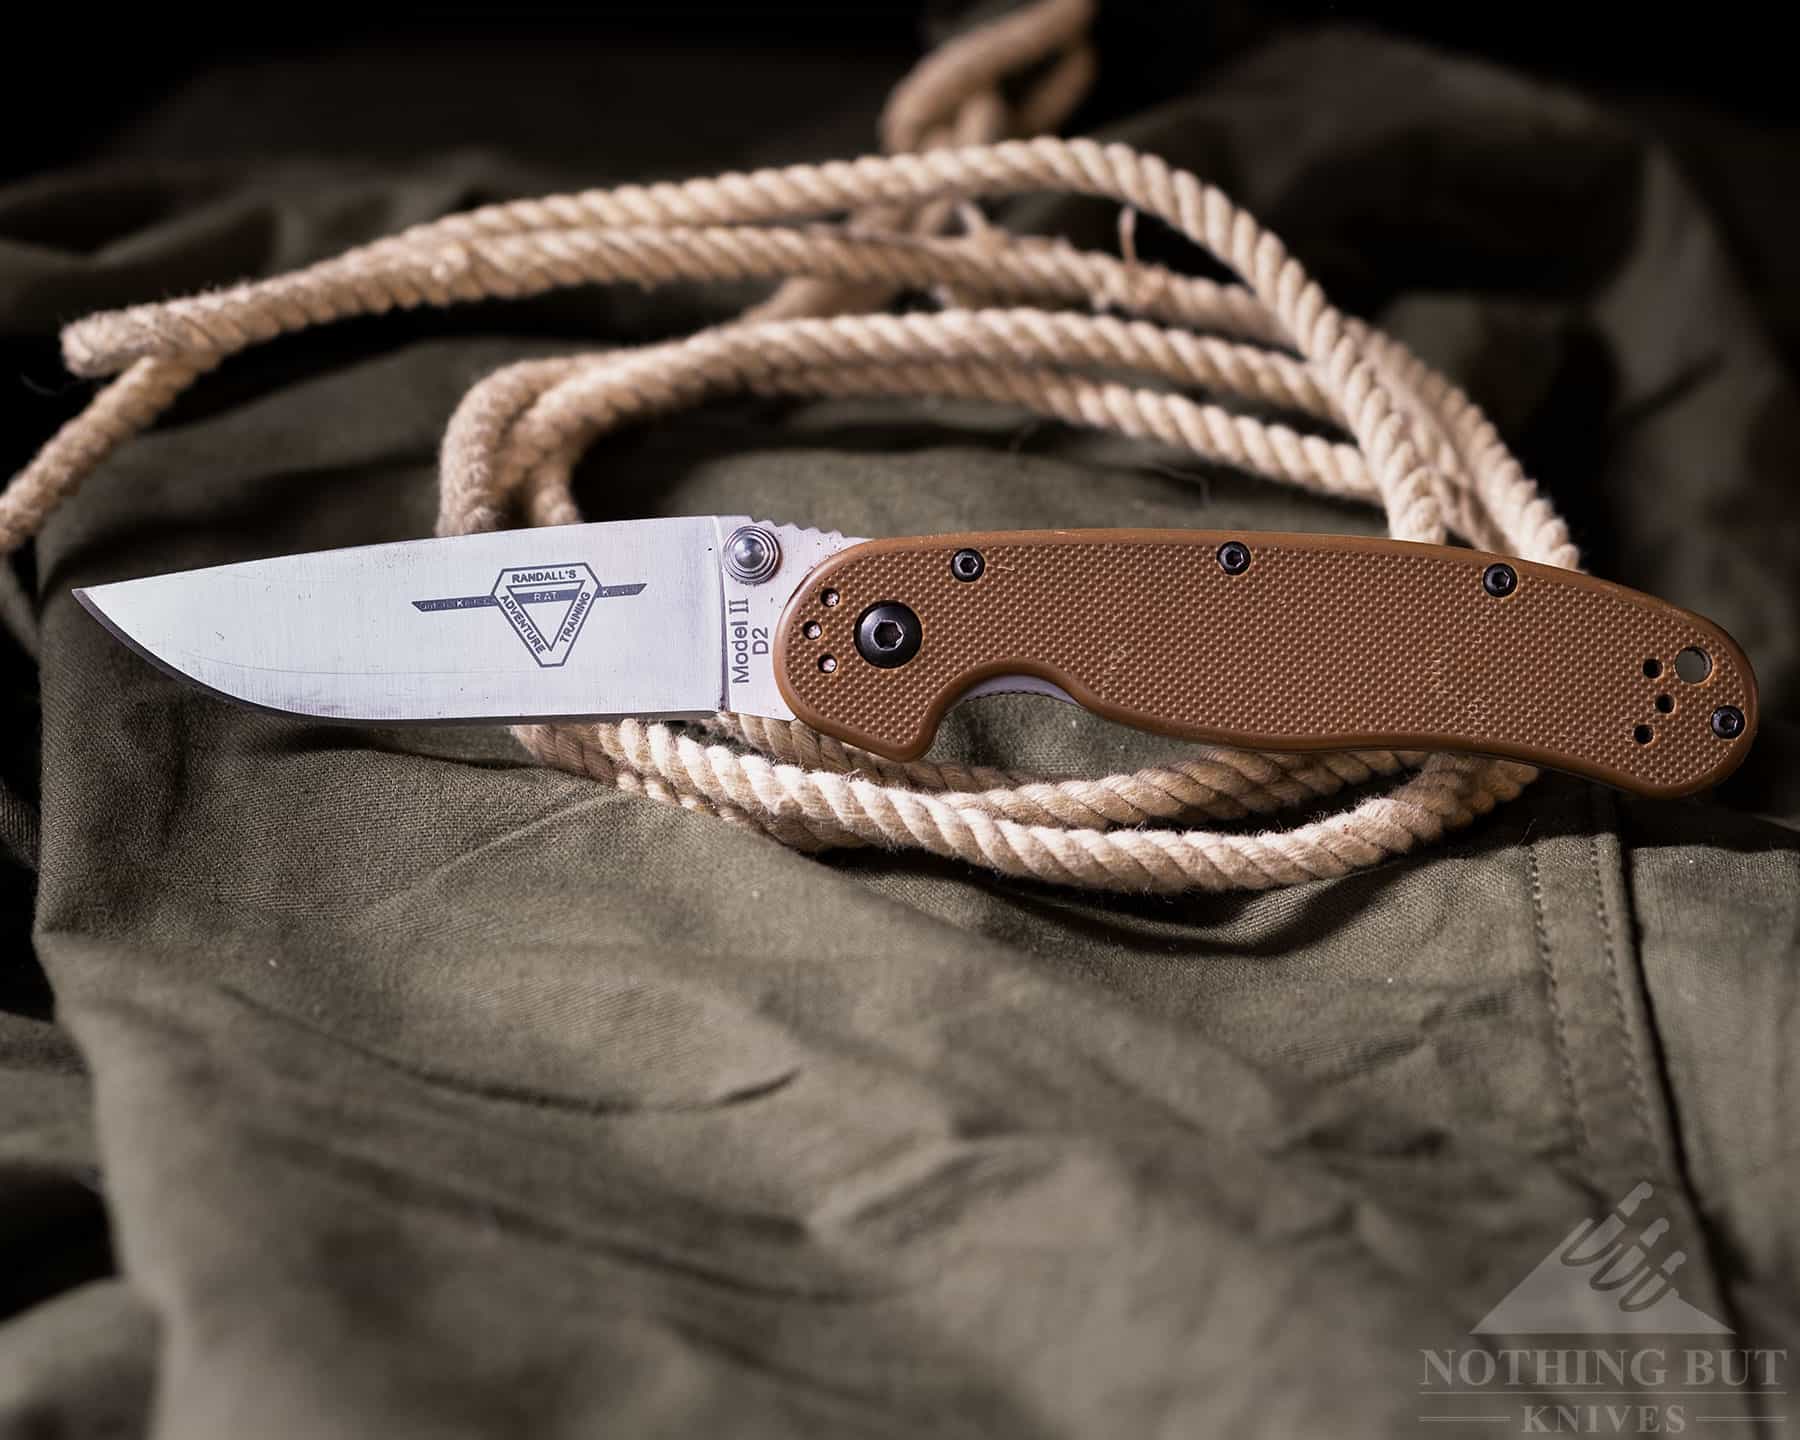 The Ontario is an extremely popular tough folding knife that is a great option for camping or working. 